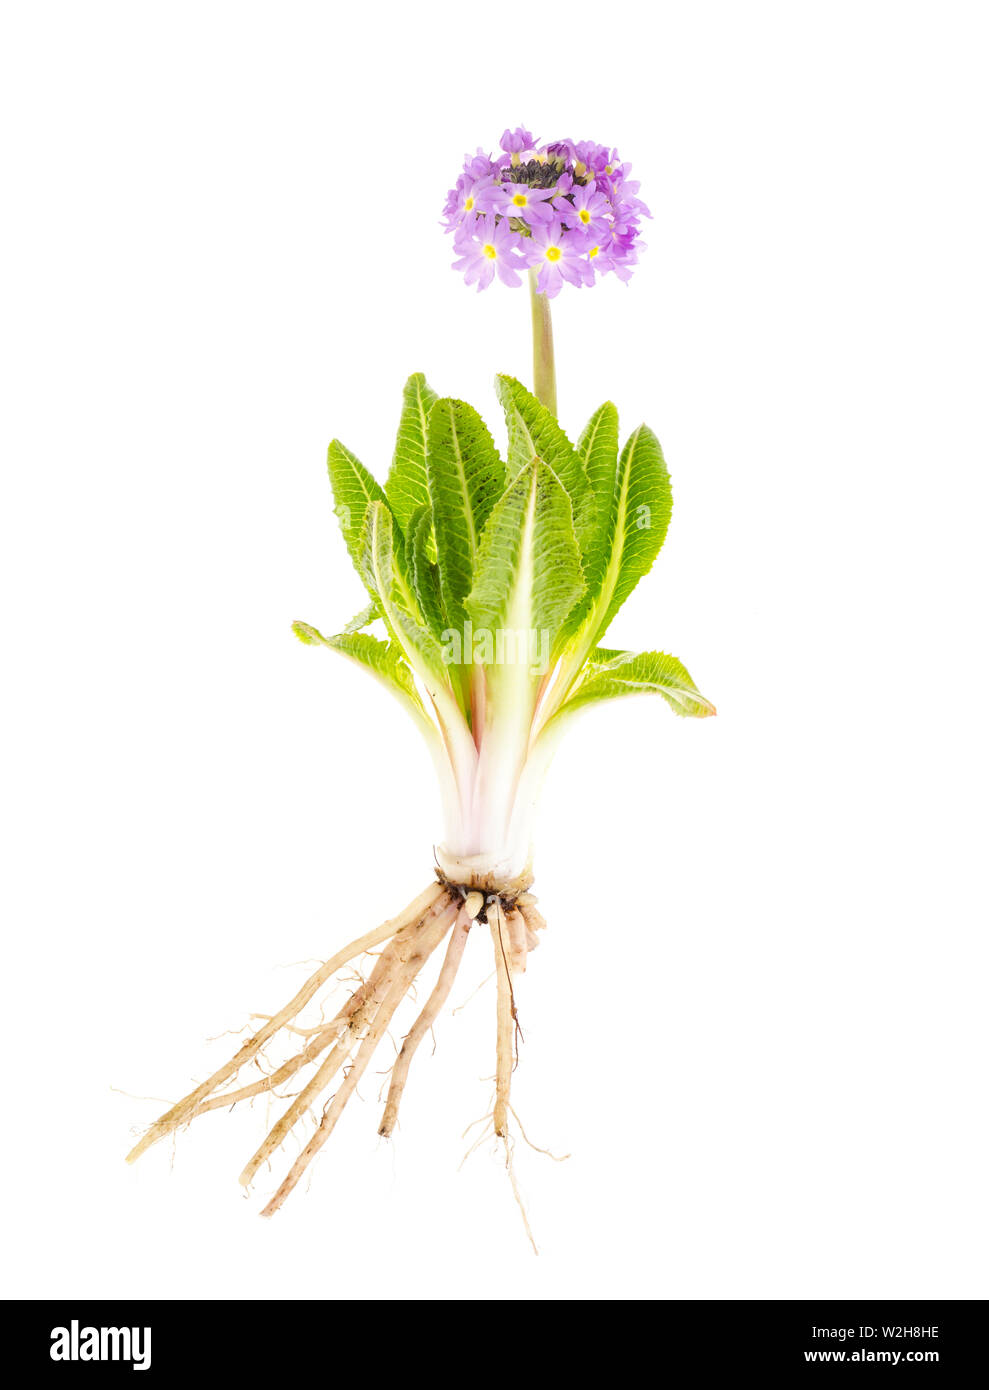 Primula plant with roots, leaves and purple flower head.  Stock Photo